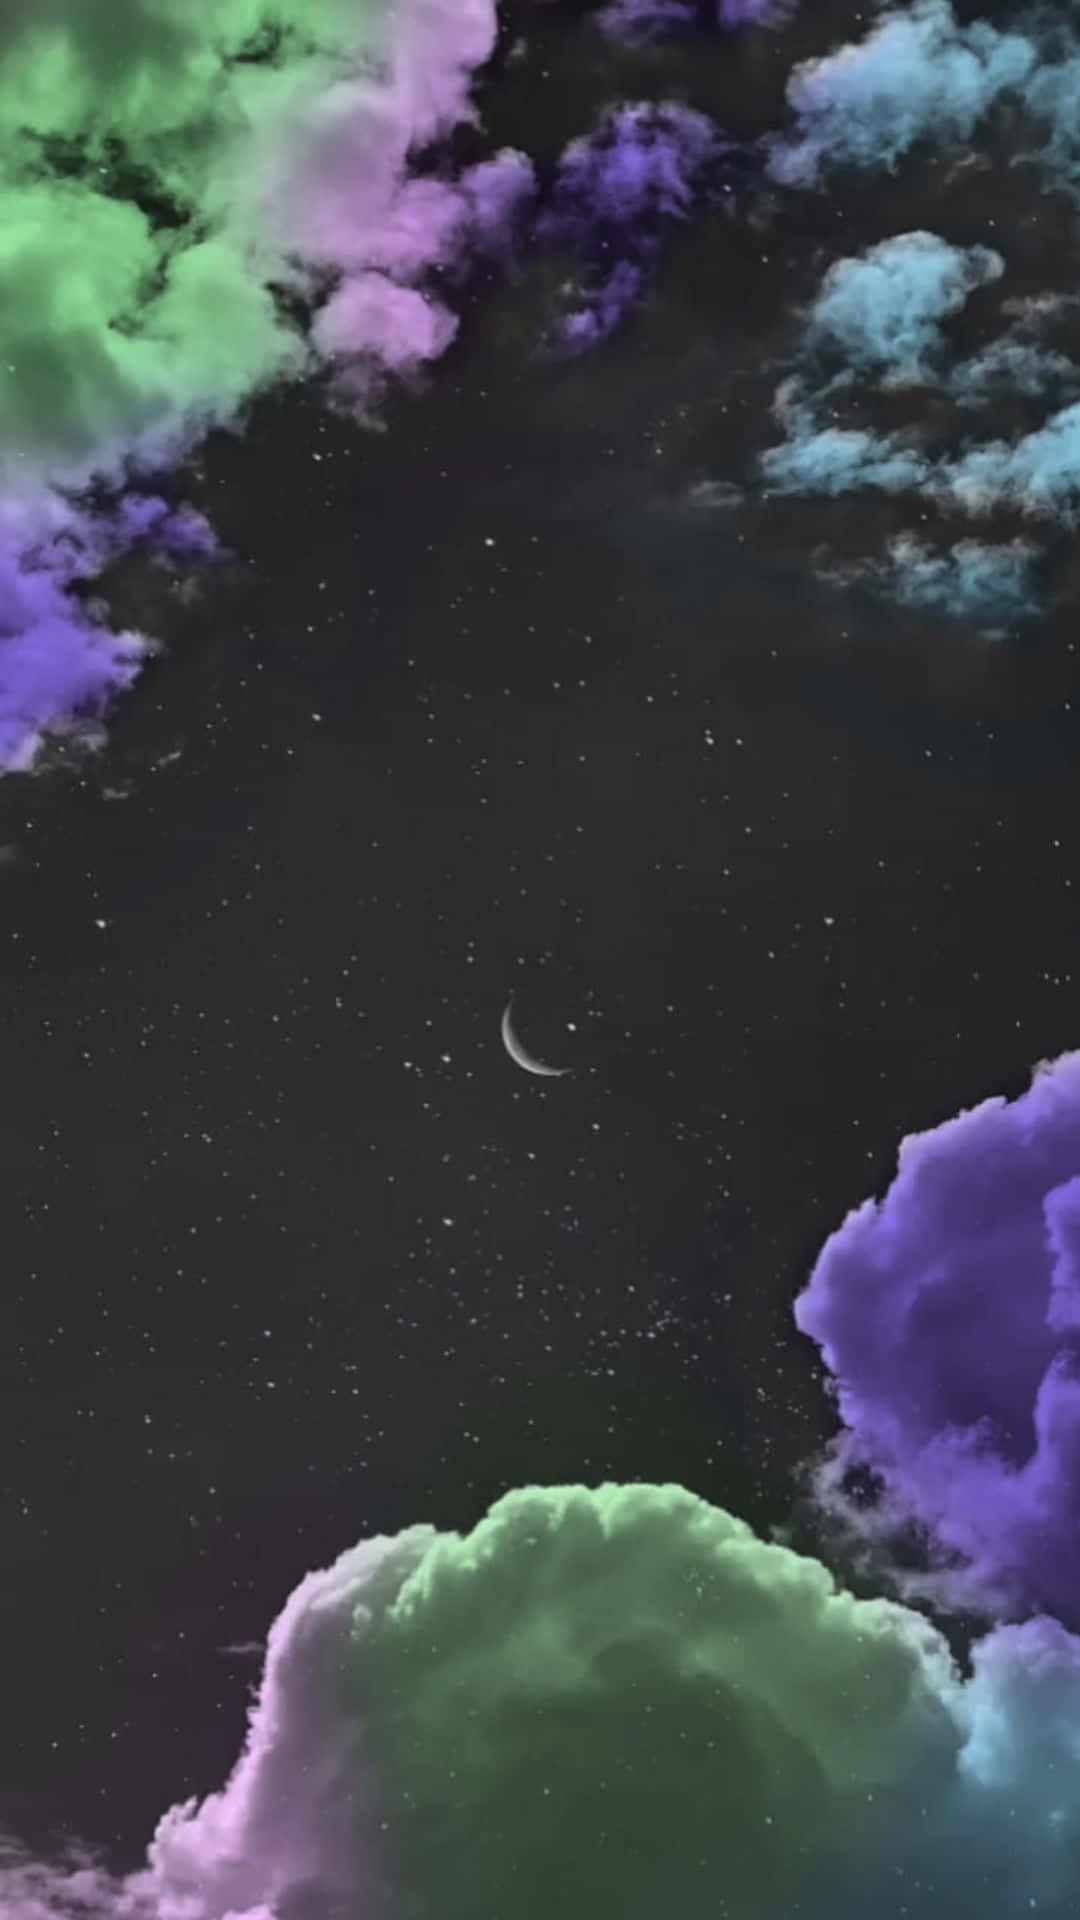 Dive into the Cosmic Horizon with Trippy Sky Wallpaper